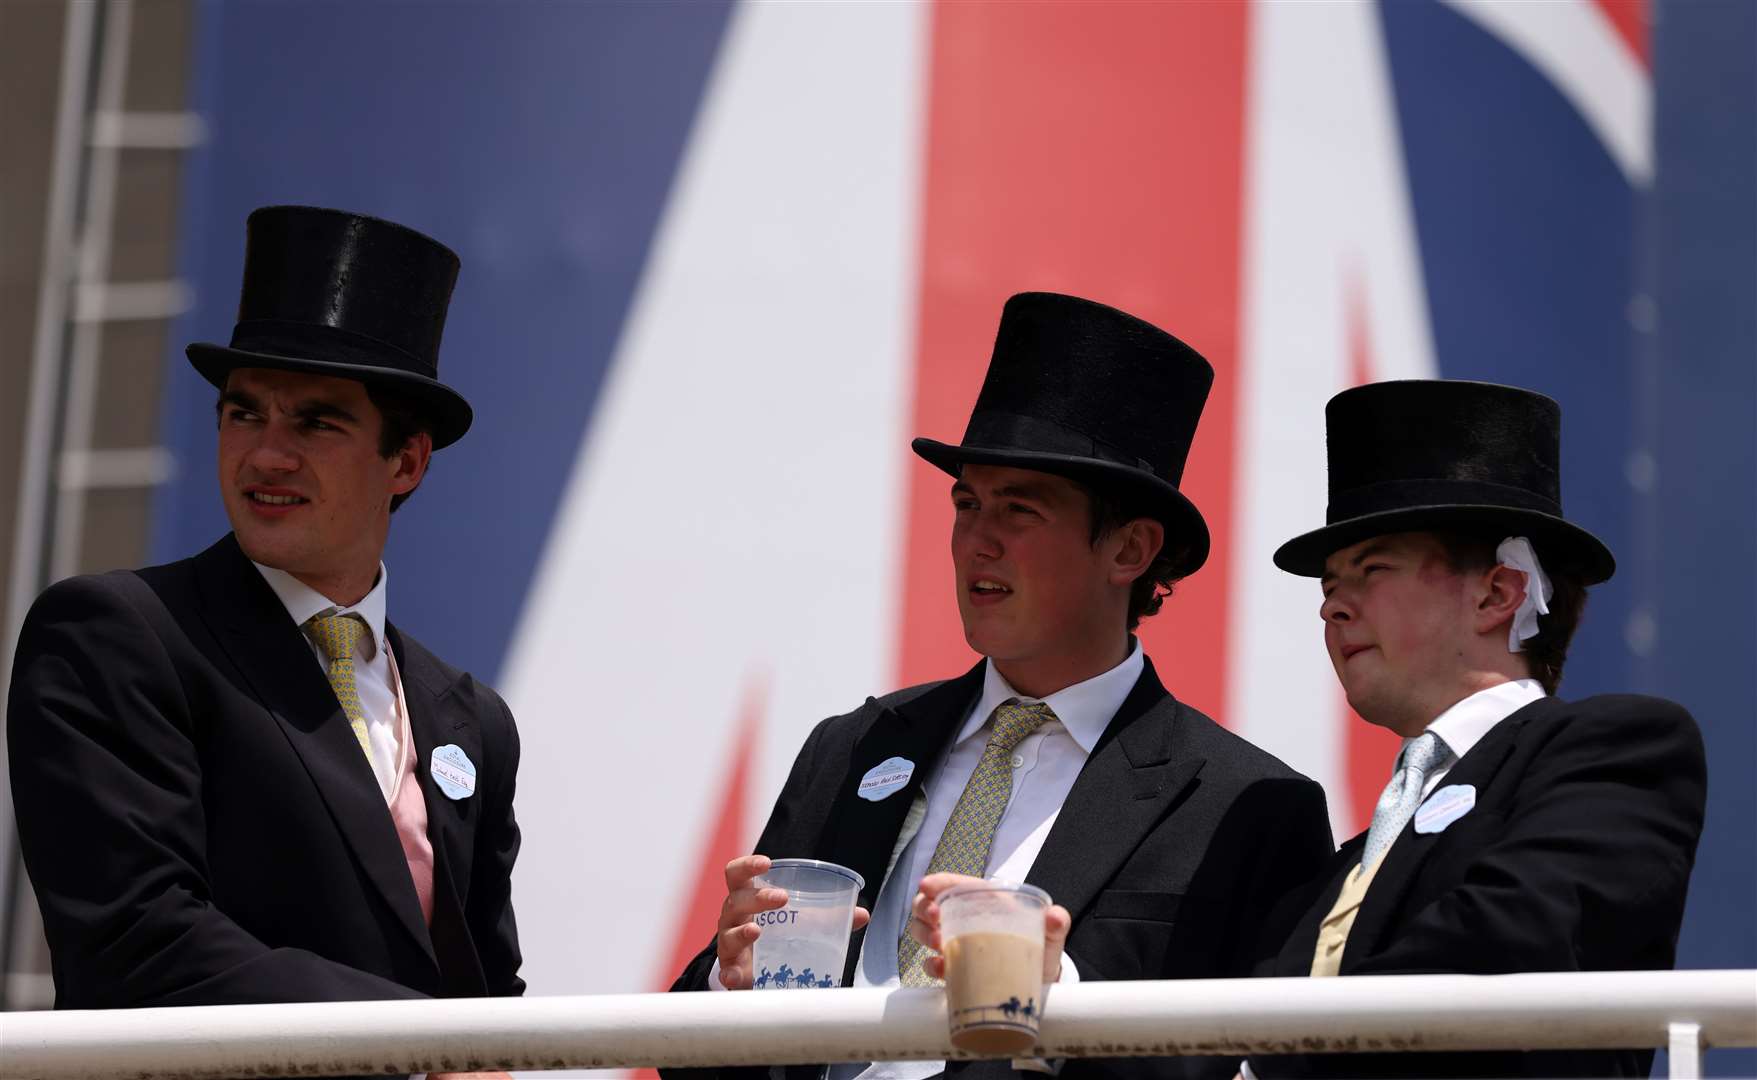 Racegoers during day two of Royal Ascot (Steven Paston/PA)